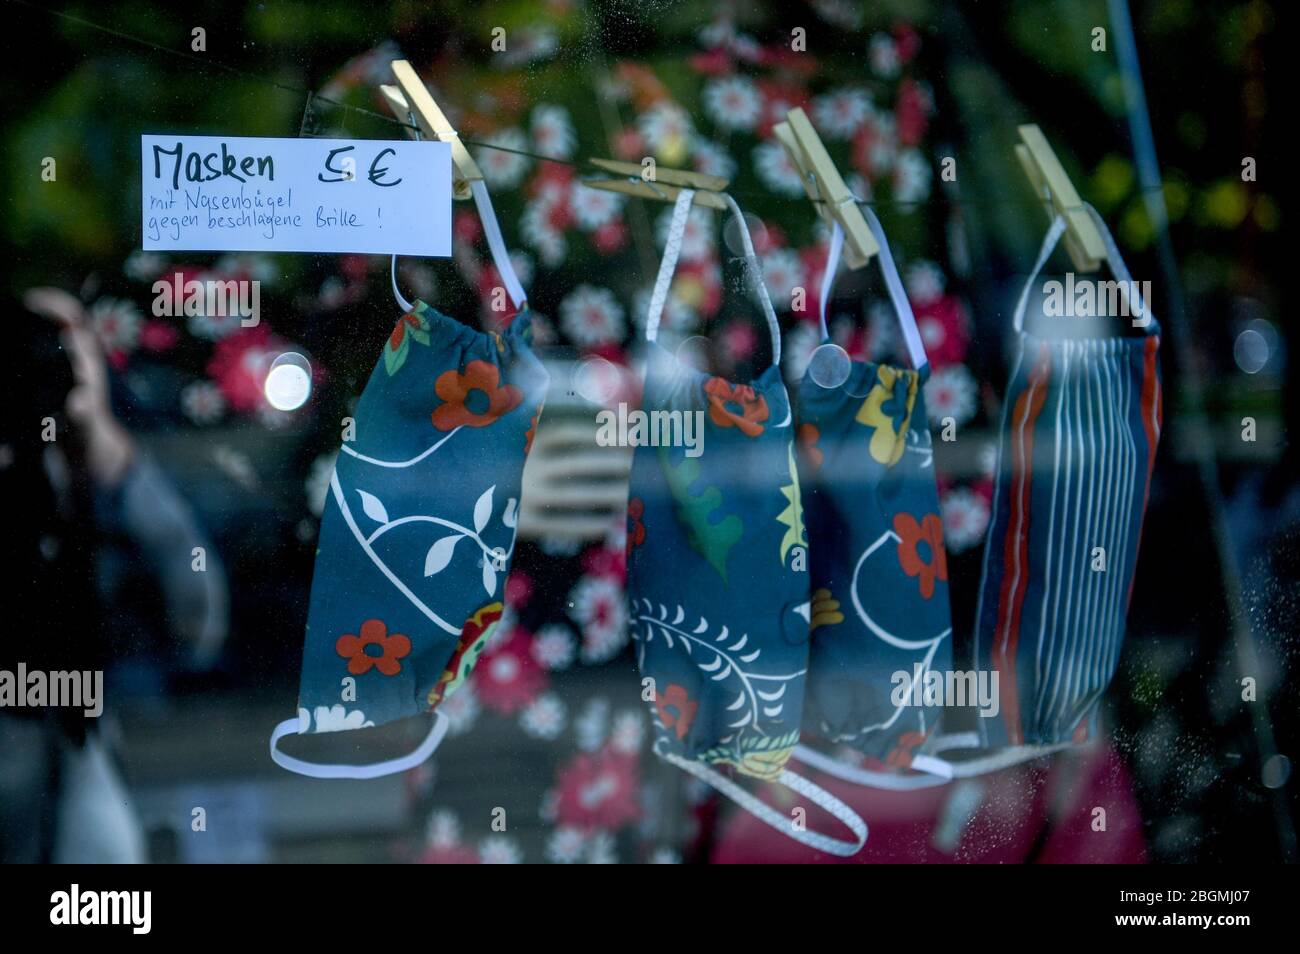 Berlin, Germany. 22nd Apr, 2020. A shop offers nose-mouth protection for sale in the shop window. Credit: Bernd von Jutrczenka/dpa/Alamy Live News Stock Photo